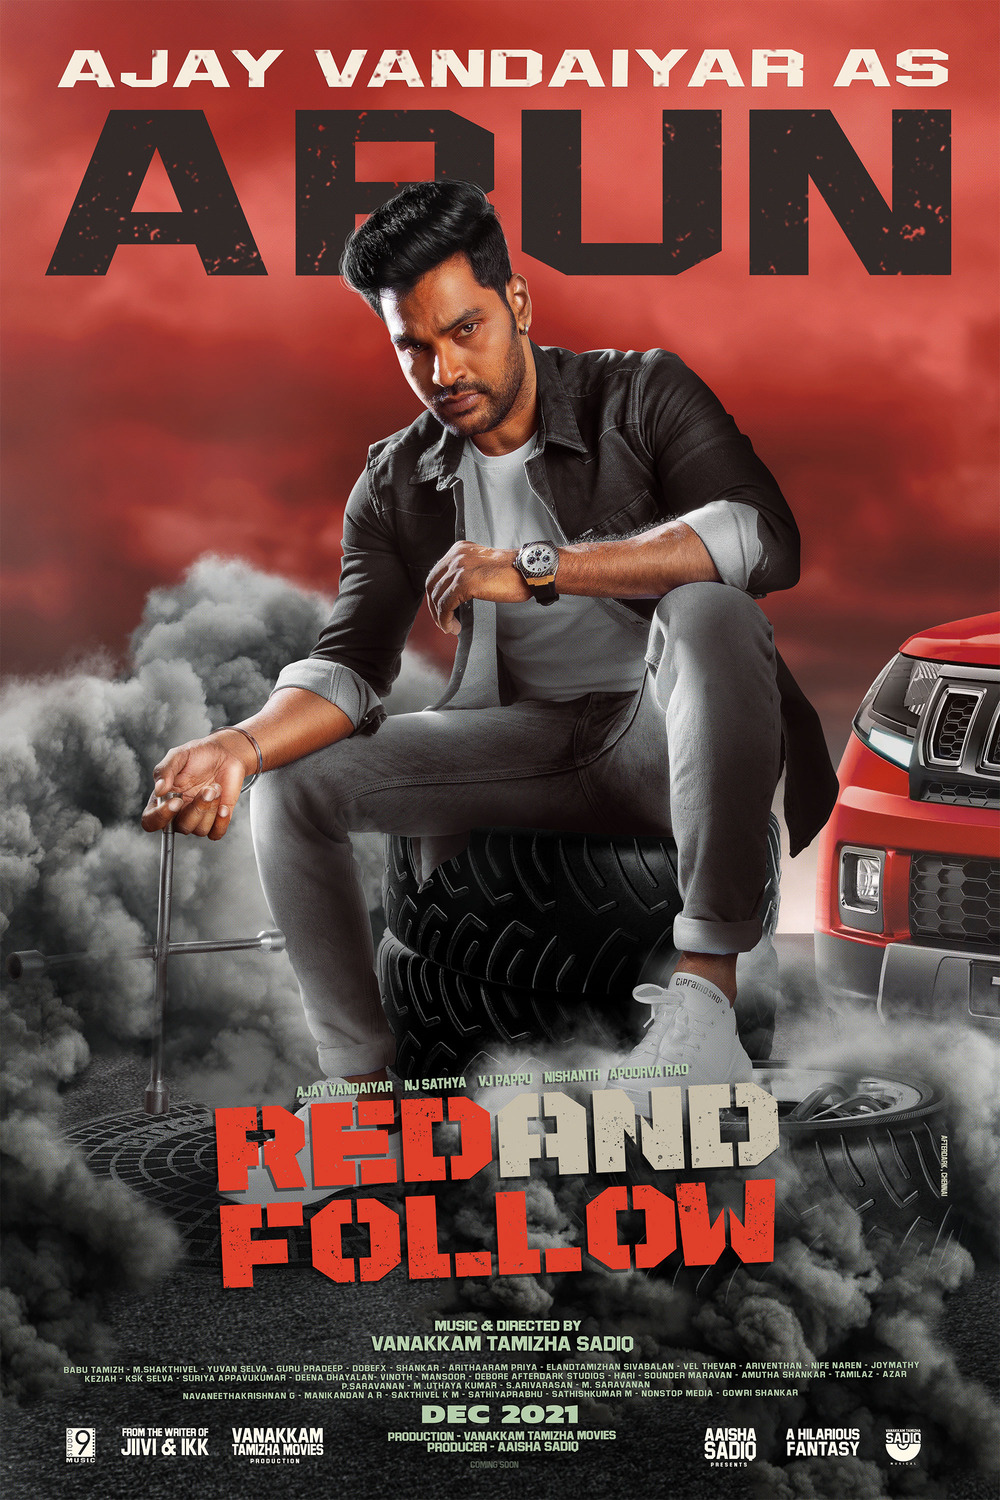 Extra Large Movie Poster Image for Red and Follow (#5 of 10)